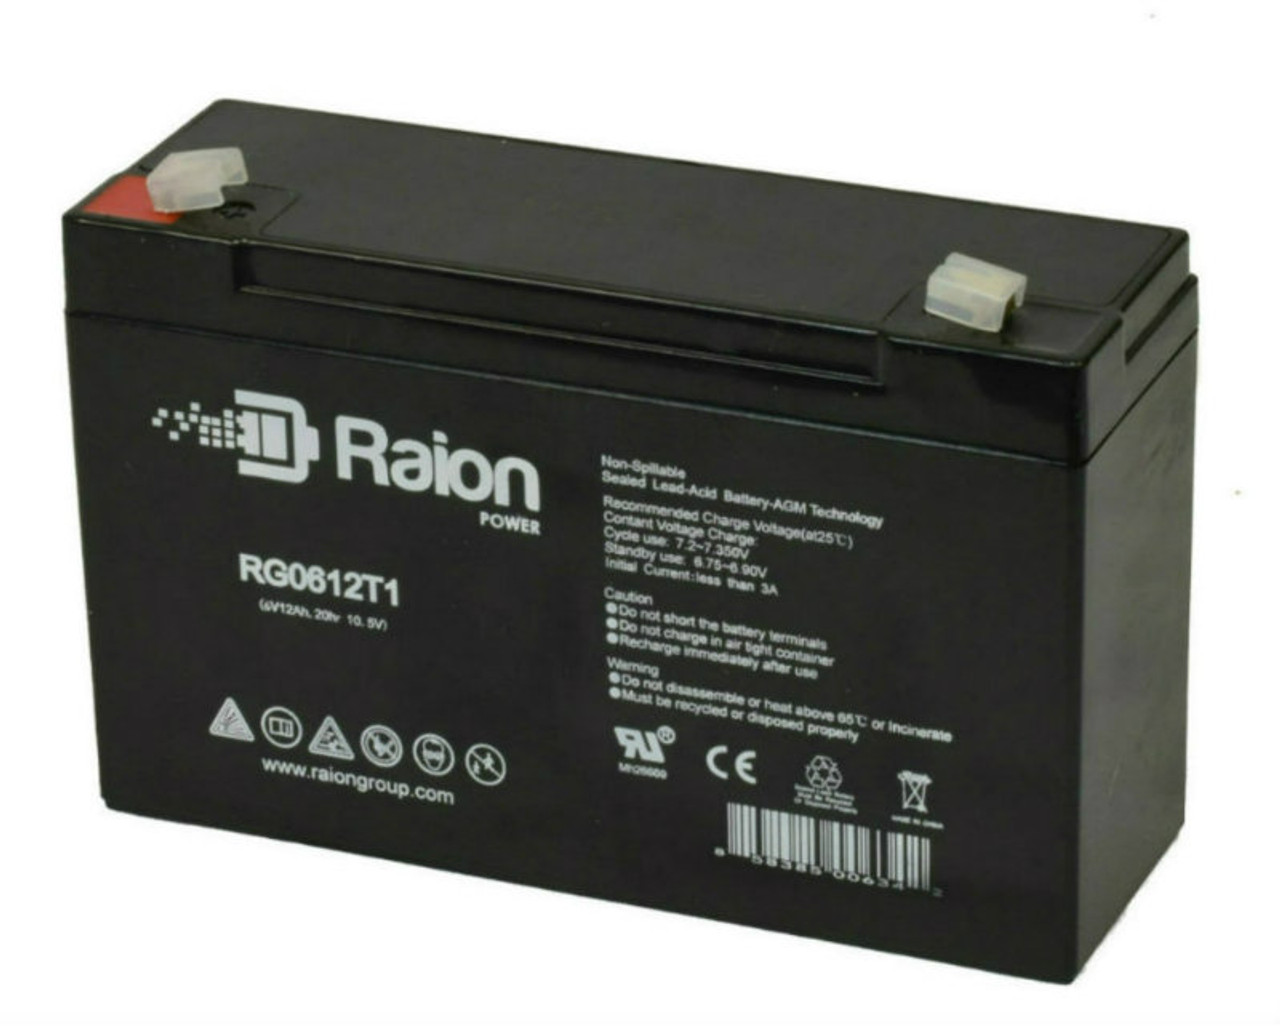 Raion Power RG06120T1 Replacement Battery for Kung Long WP12-6S